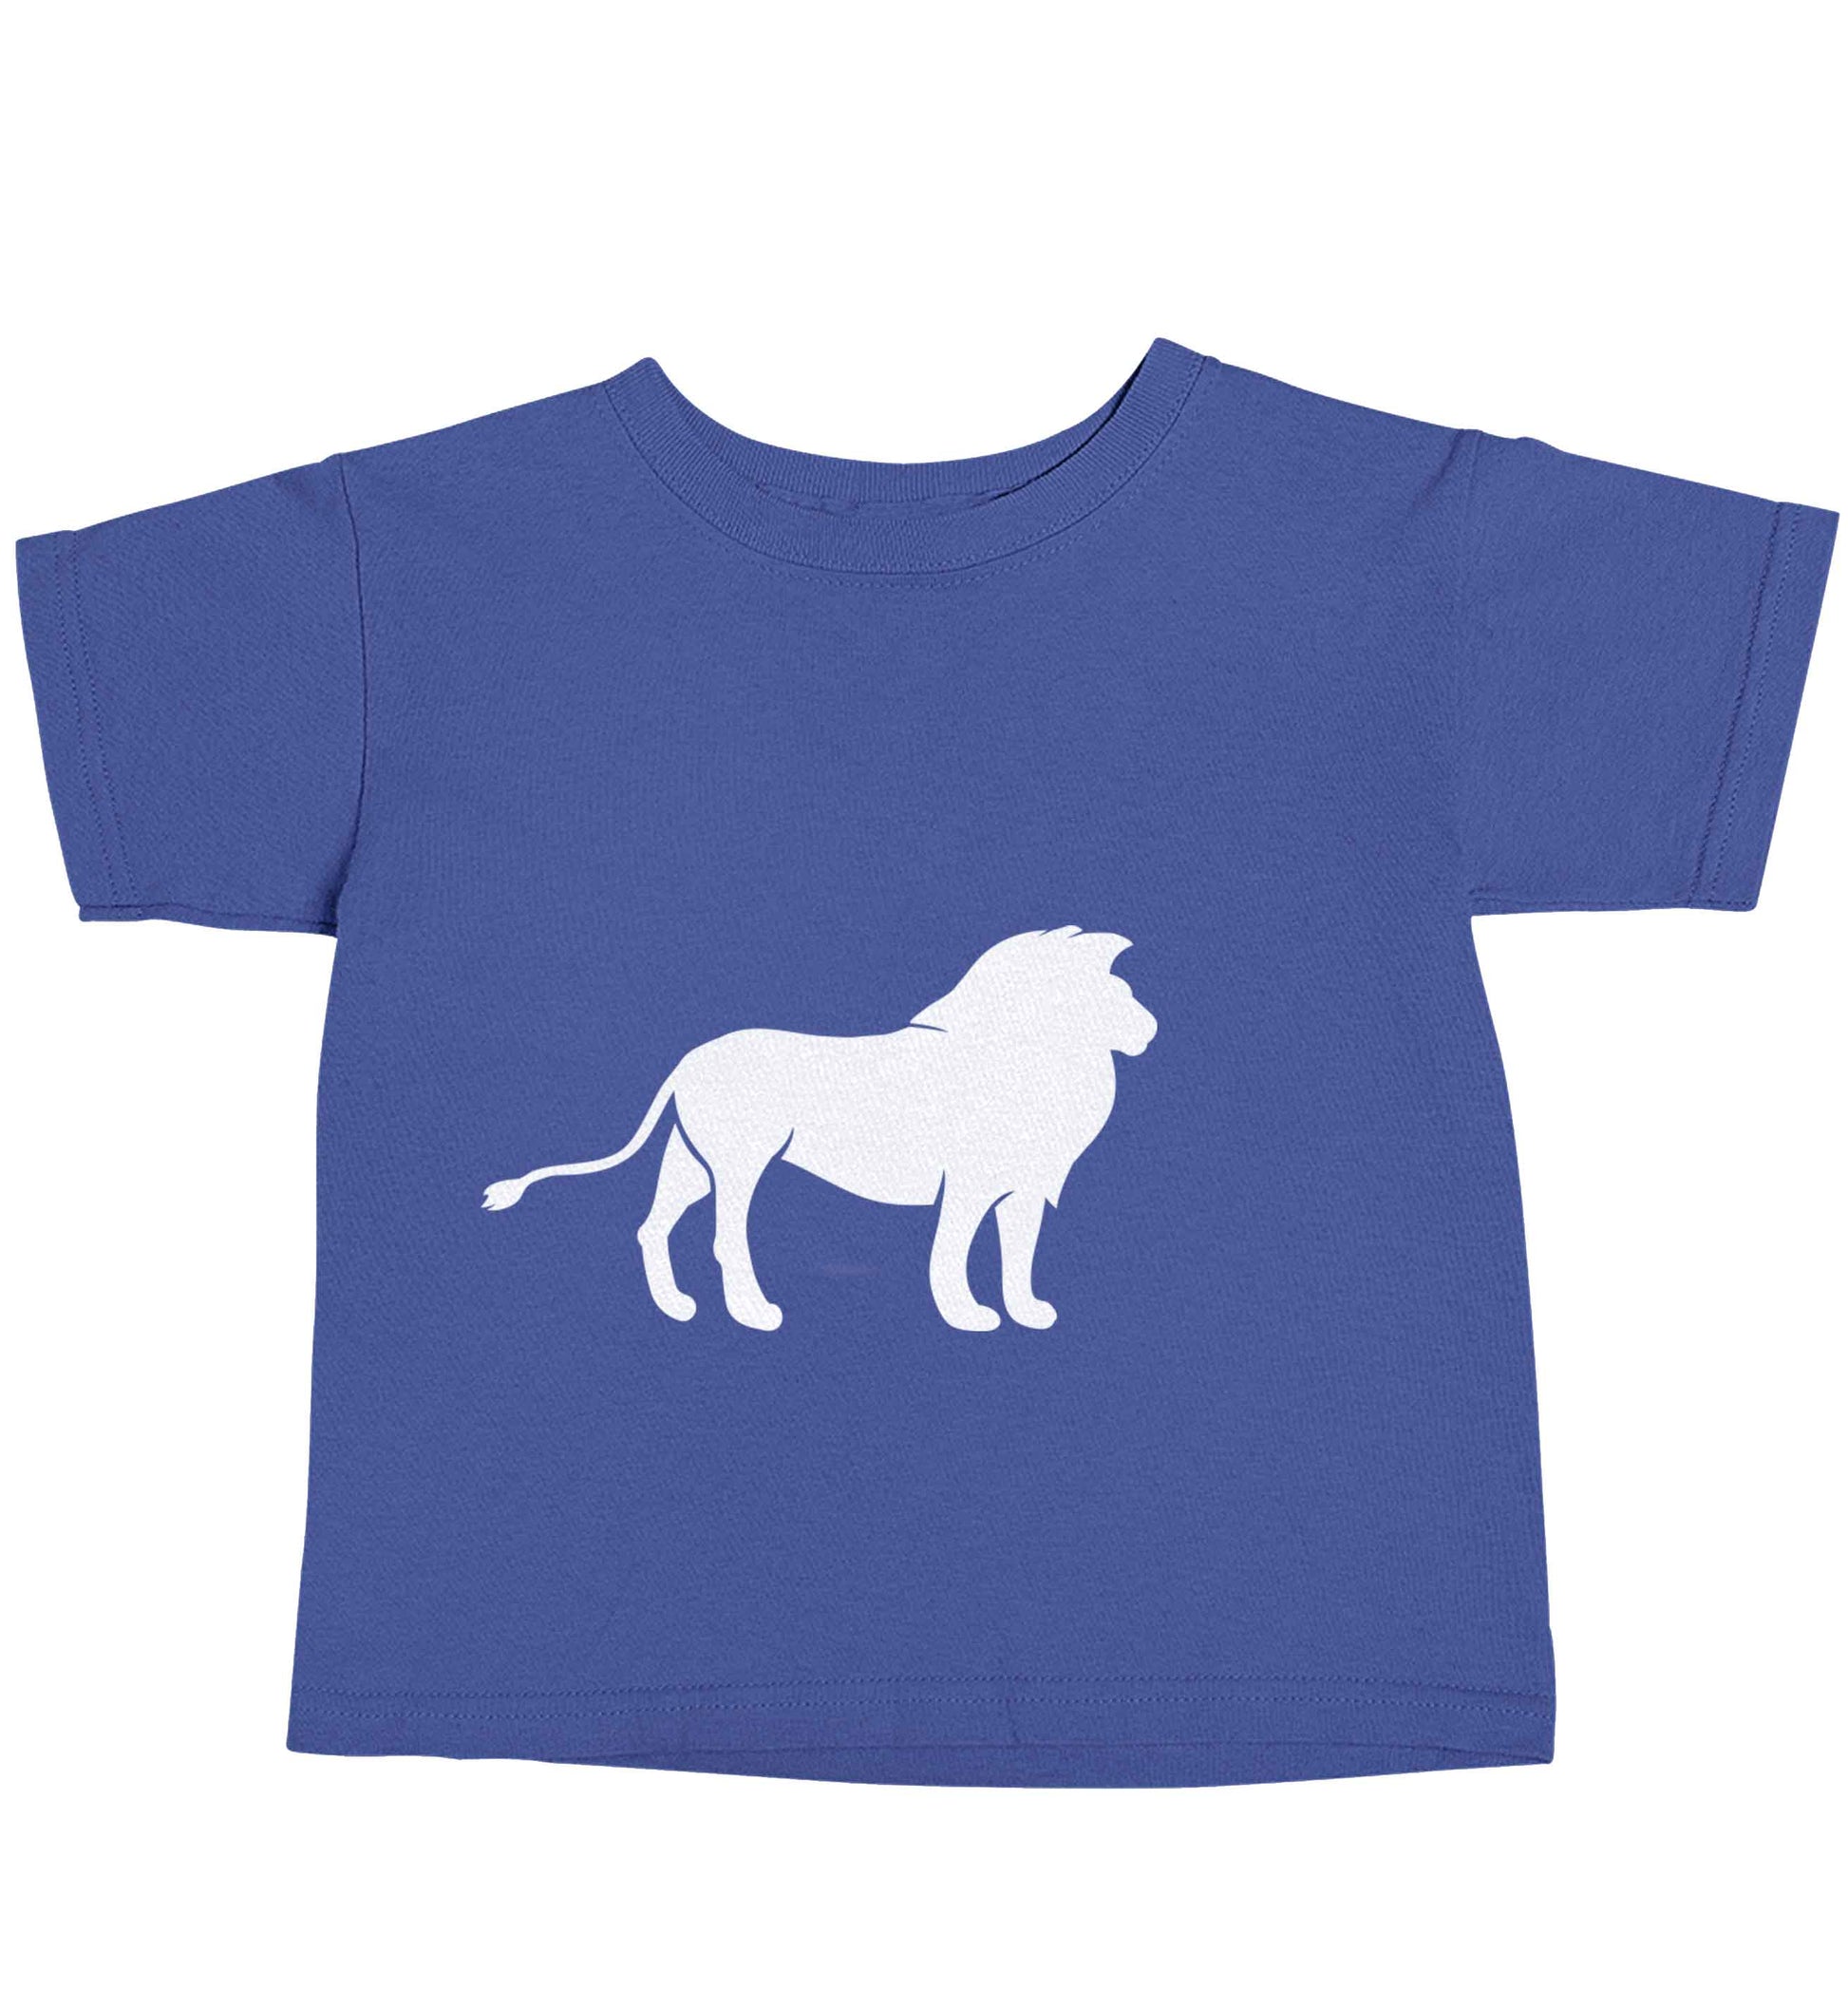 Gold lion blue baby toddler Tshirt 2 Years